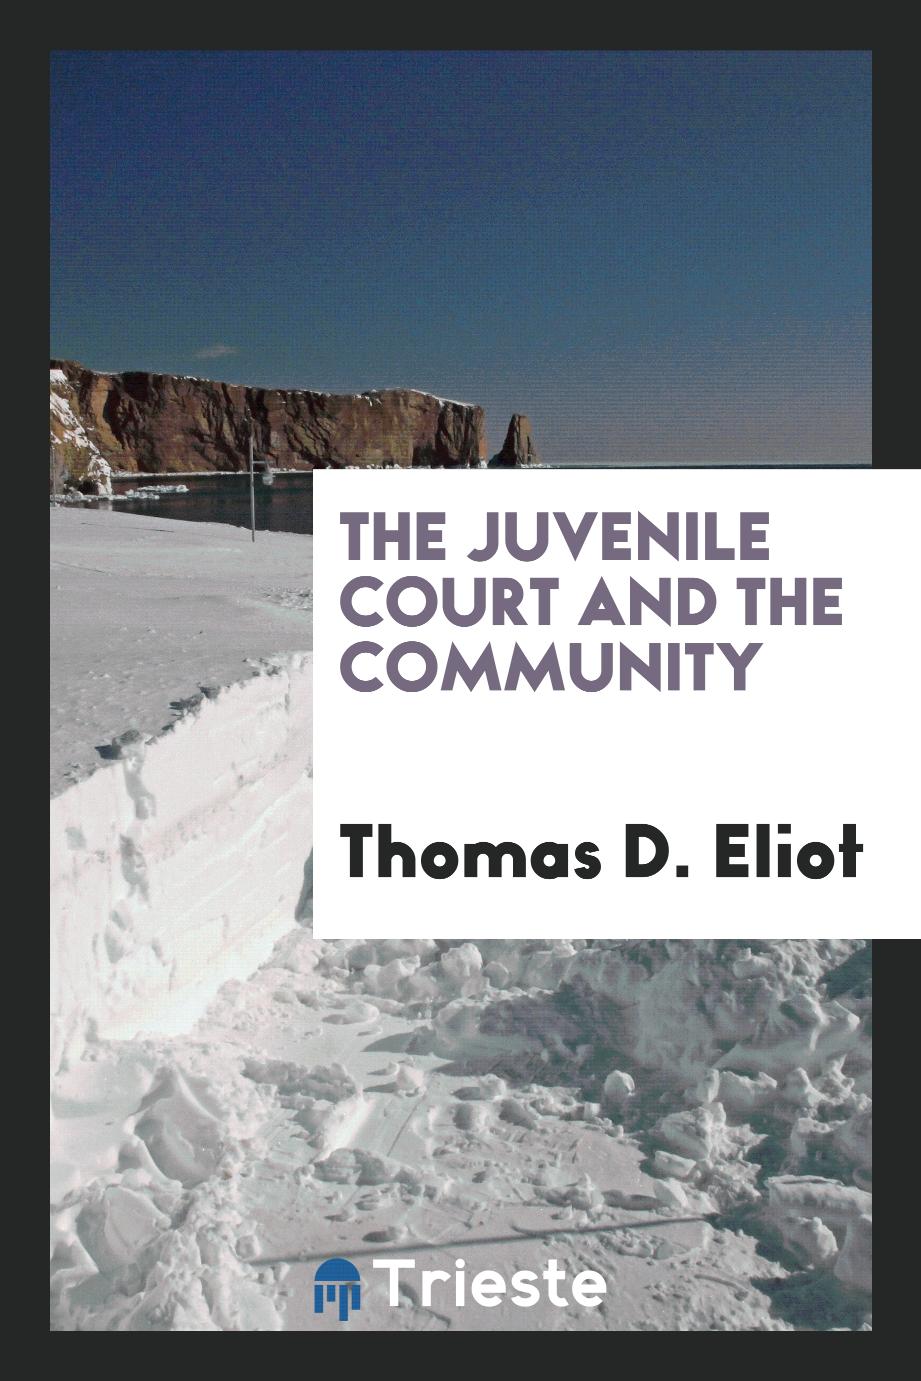 The juvenile court and the community